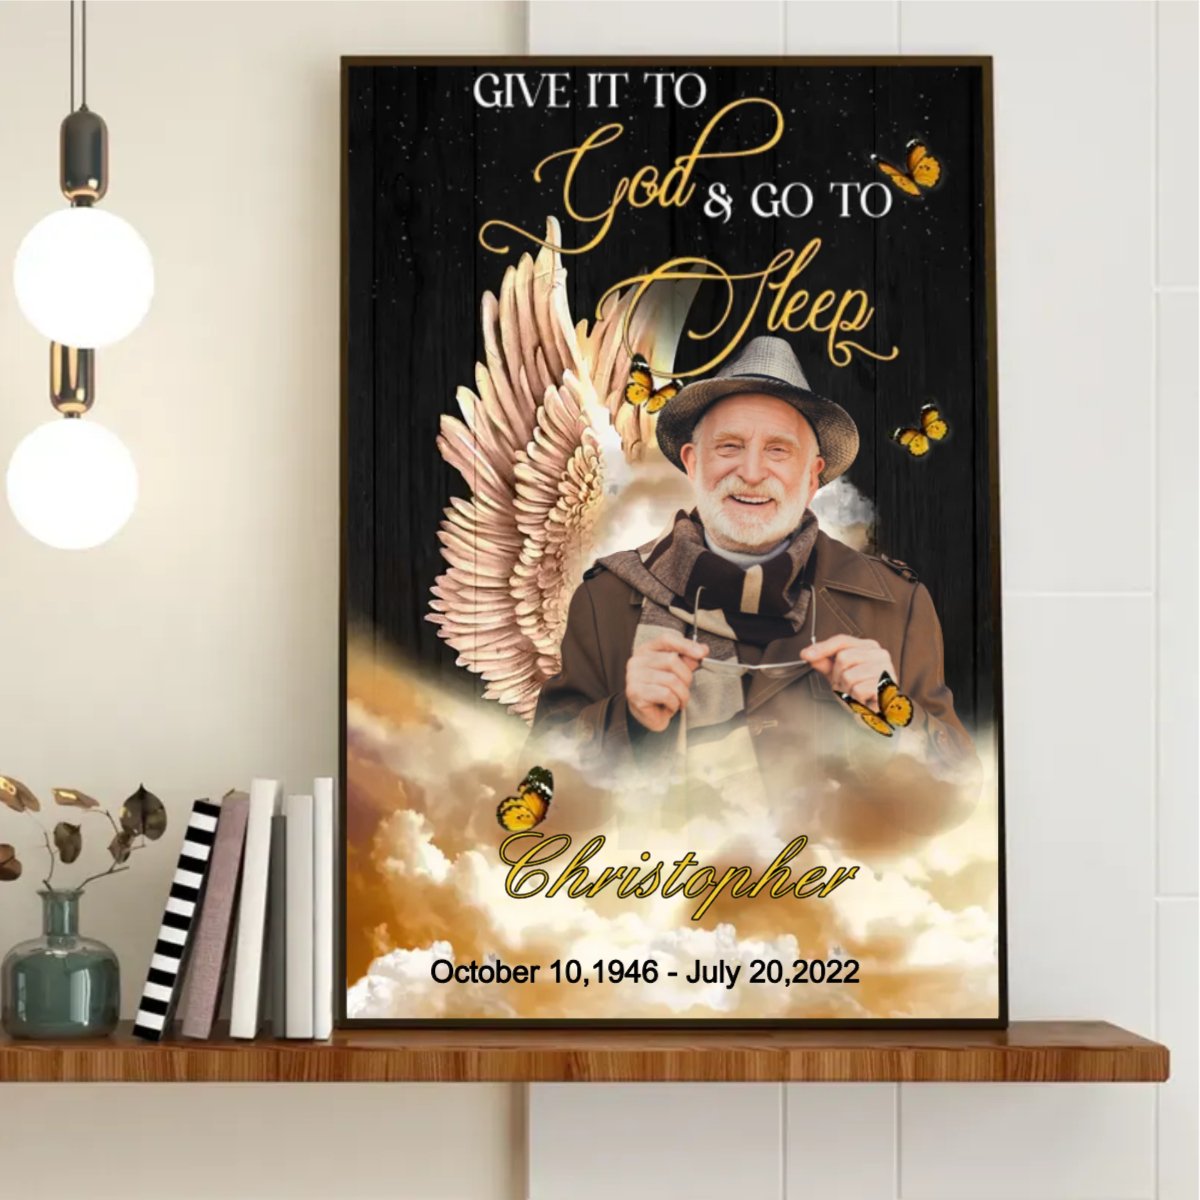 Memories - Give It To God & Go To Sleep - Personalized Canvas - The Next Custom Gift